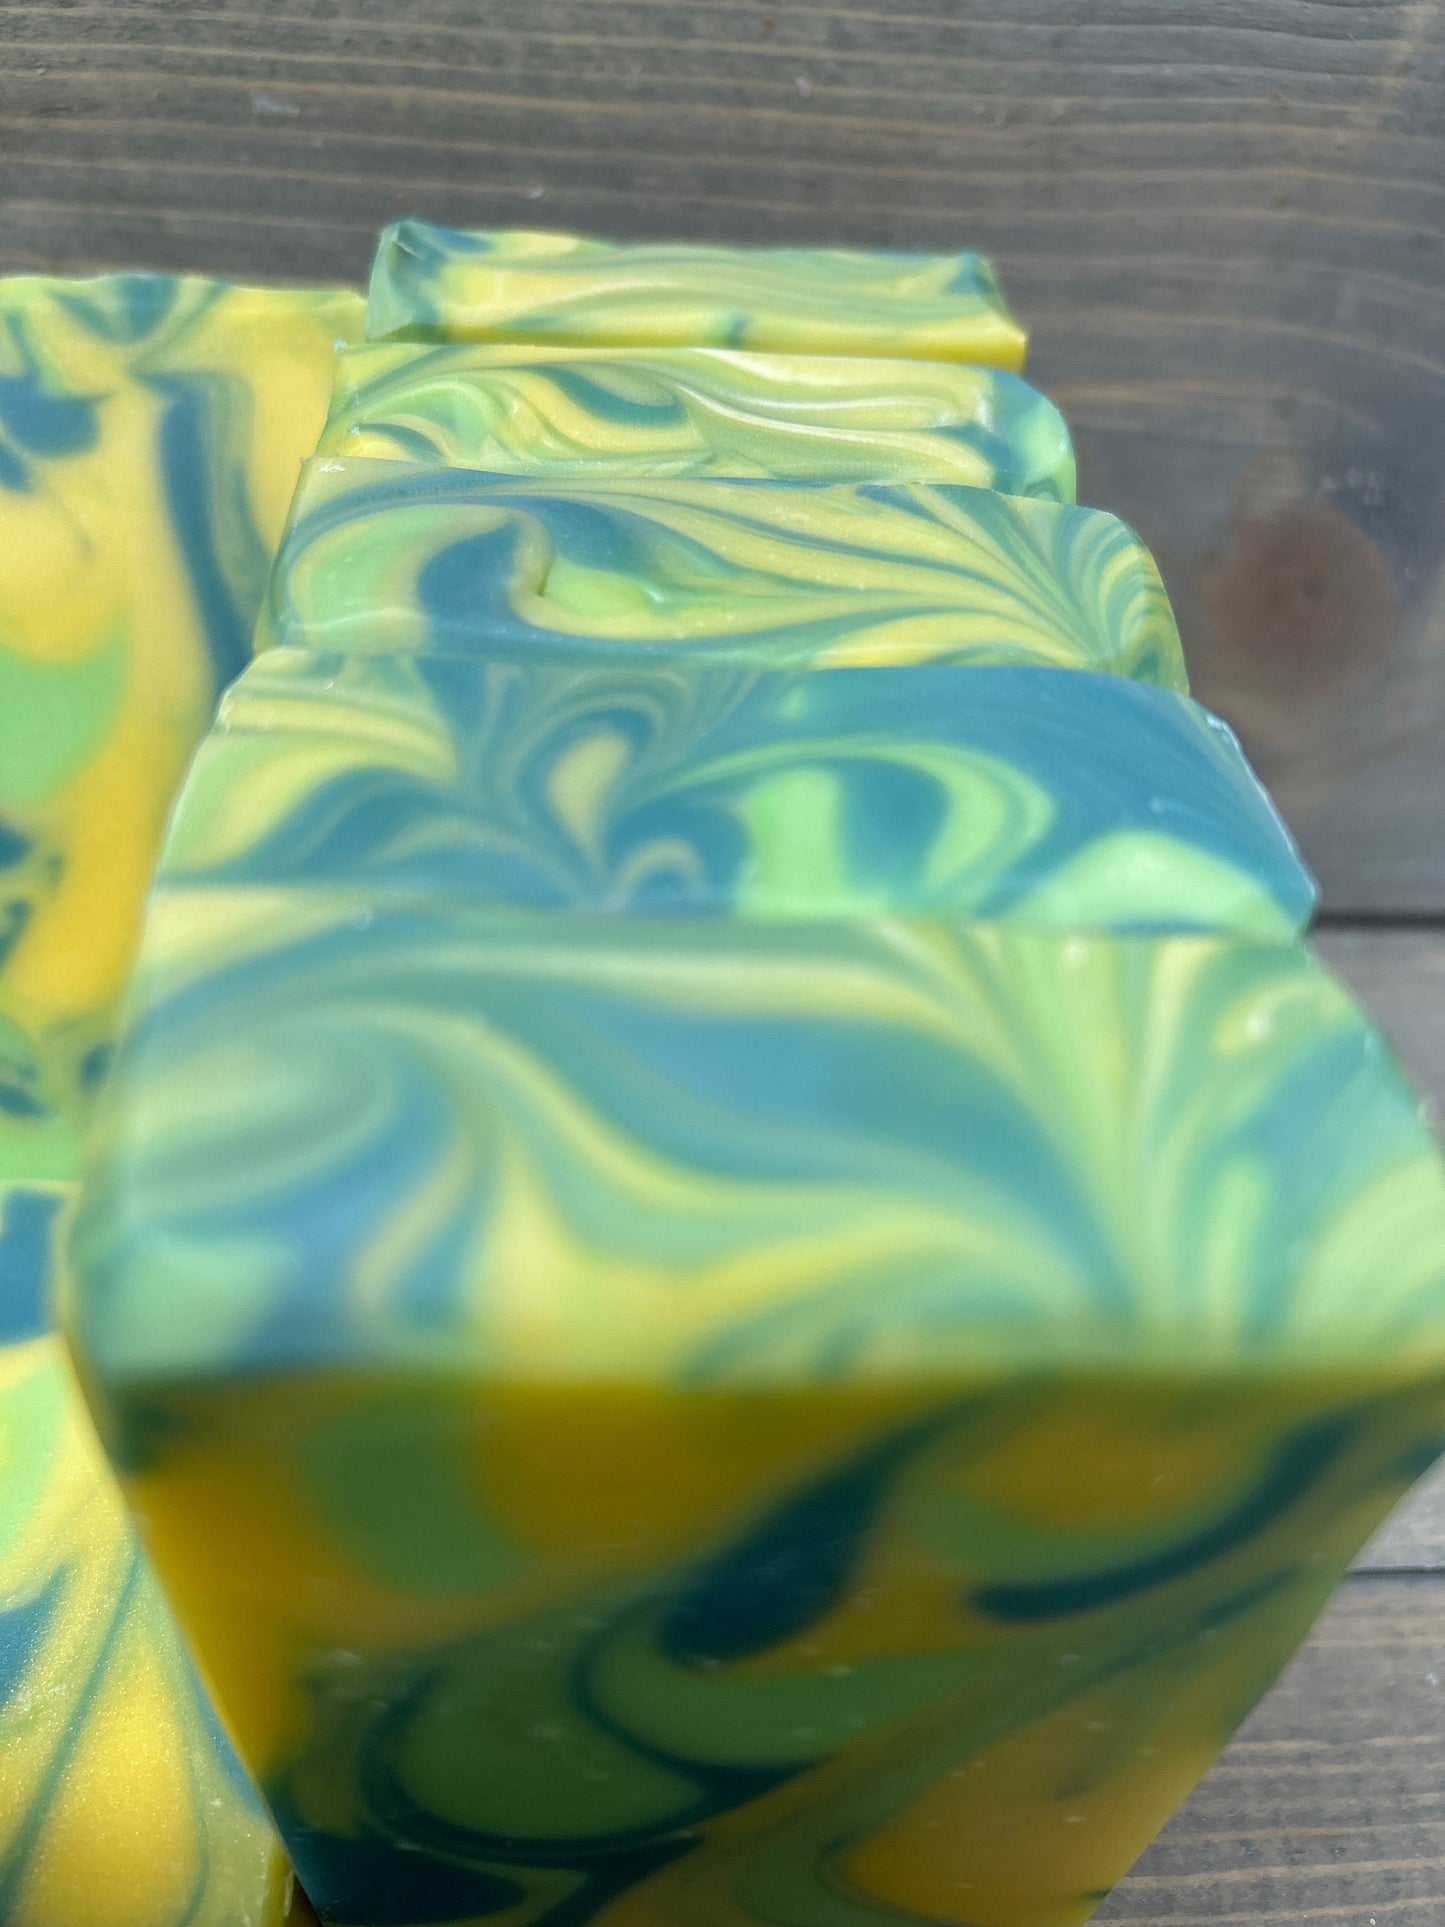 Lemongrass Bar Soap 5.0 oz. Smooth and Creamy with that Lemon scent! Ahhh